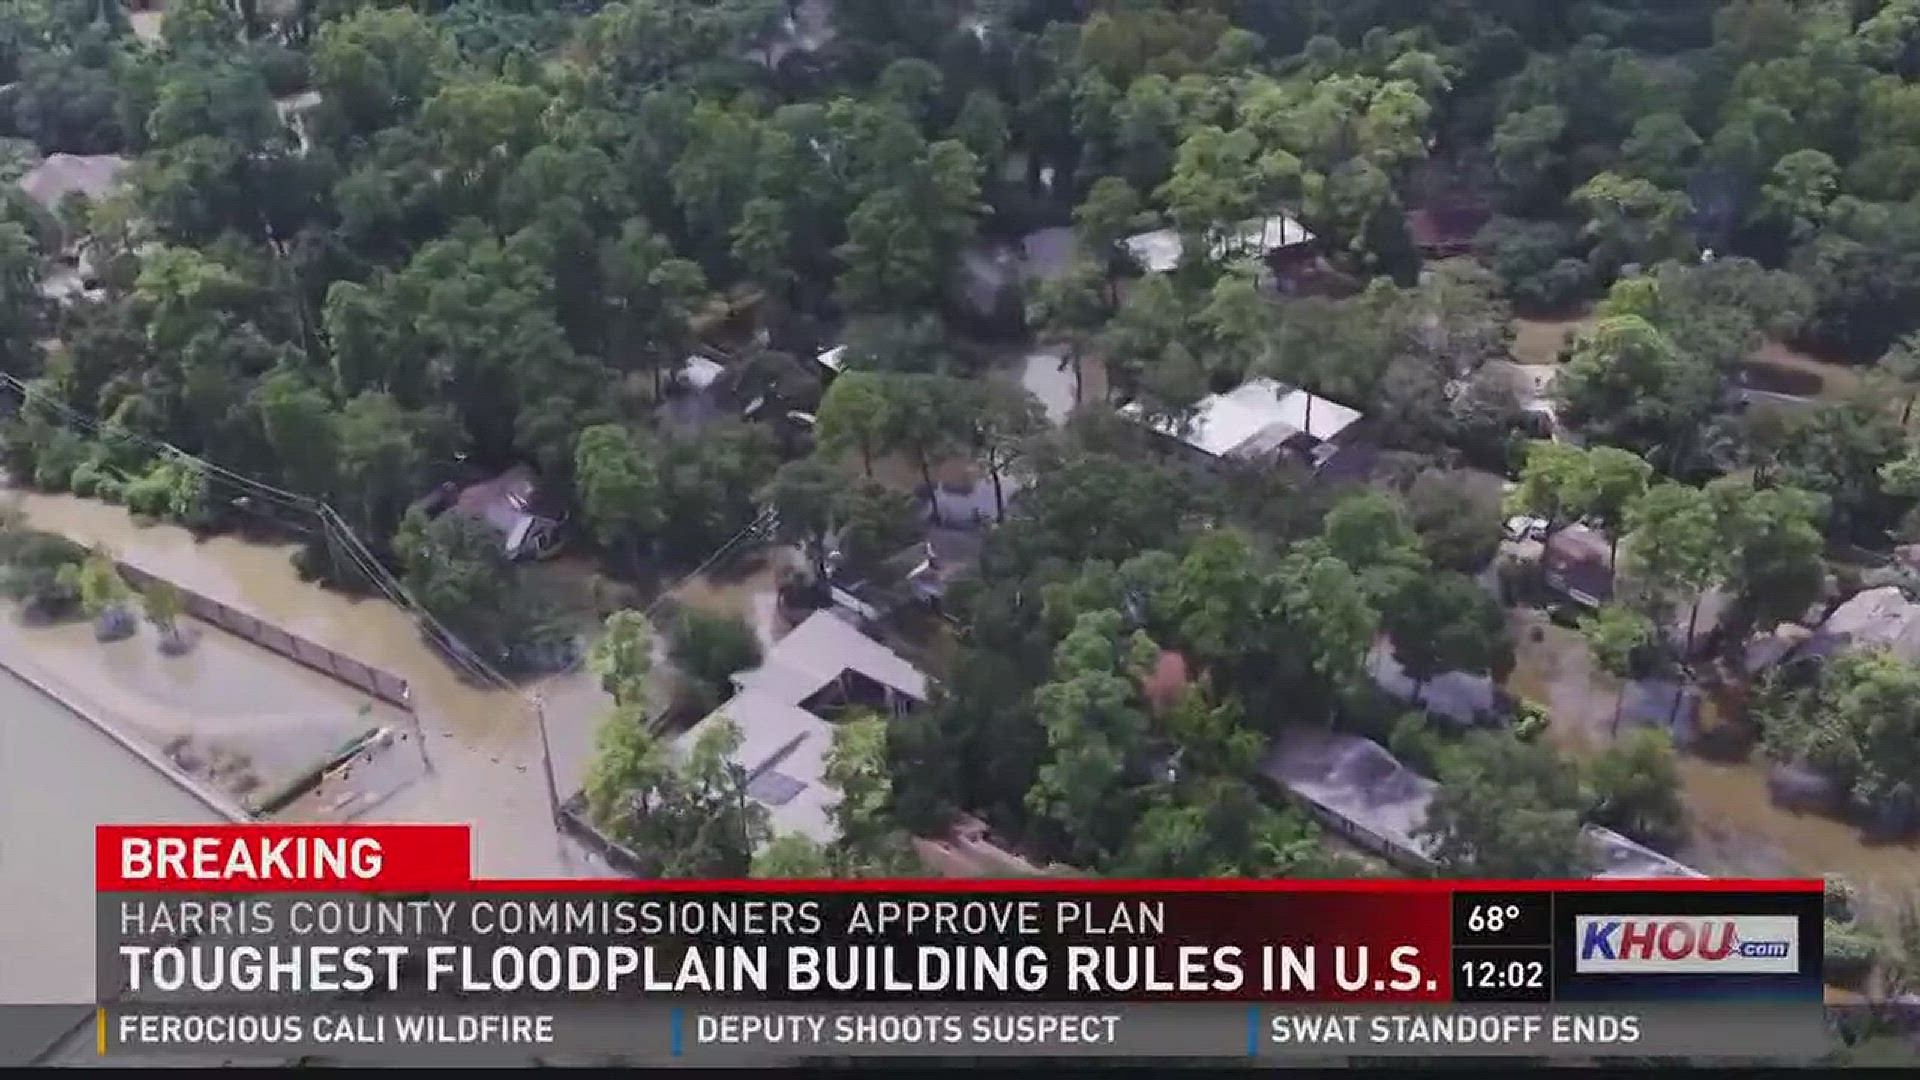 Harris County Commissioners have approved the toughest floodplain building rules in the country.